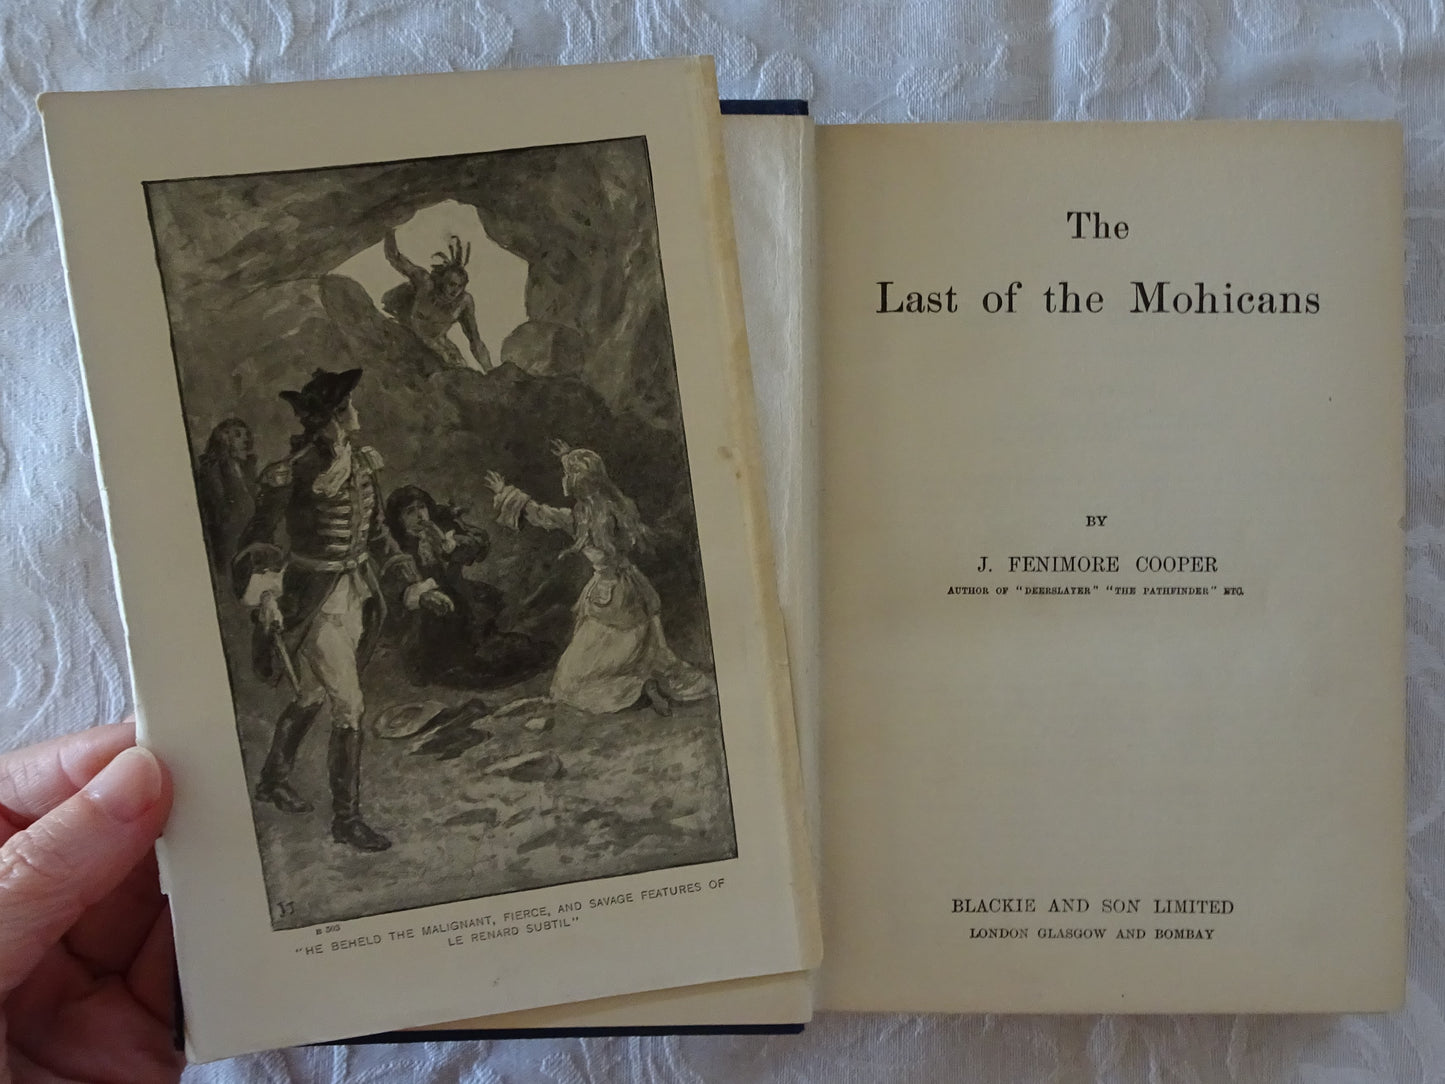 The Last of the Mohicans  by J. Fenimore Cooper